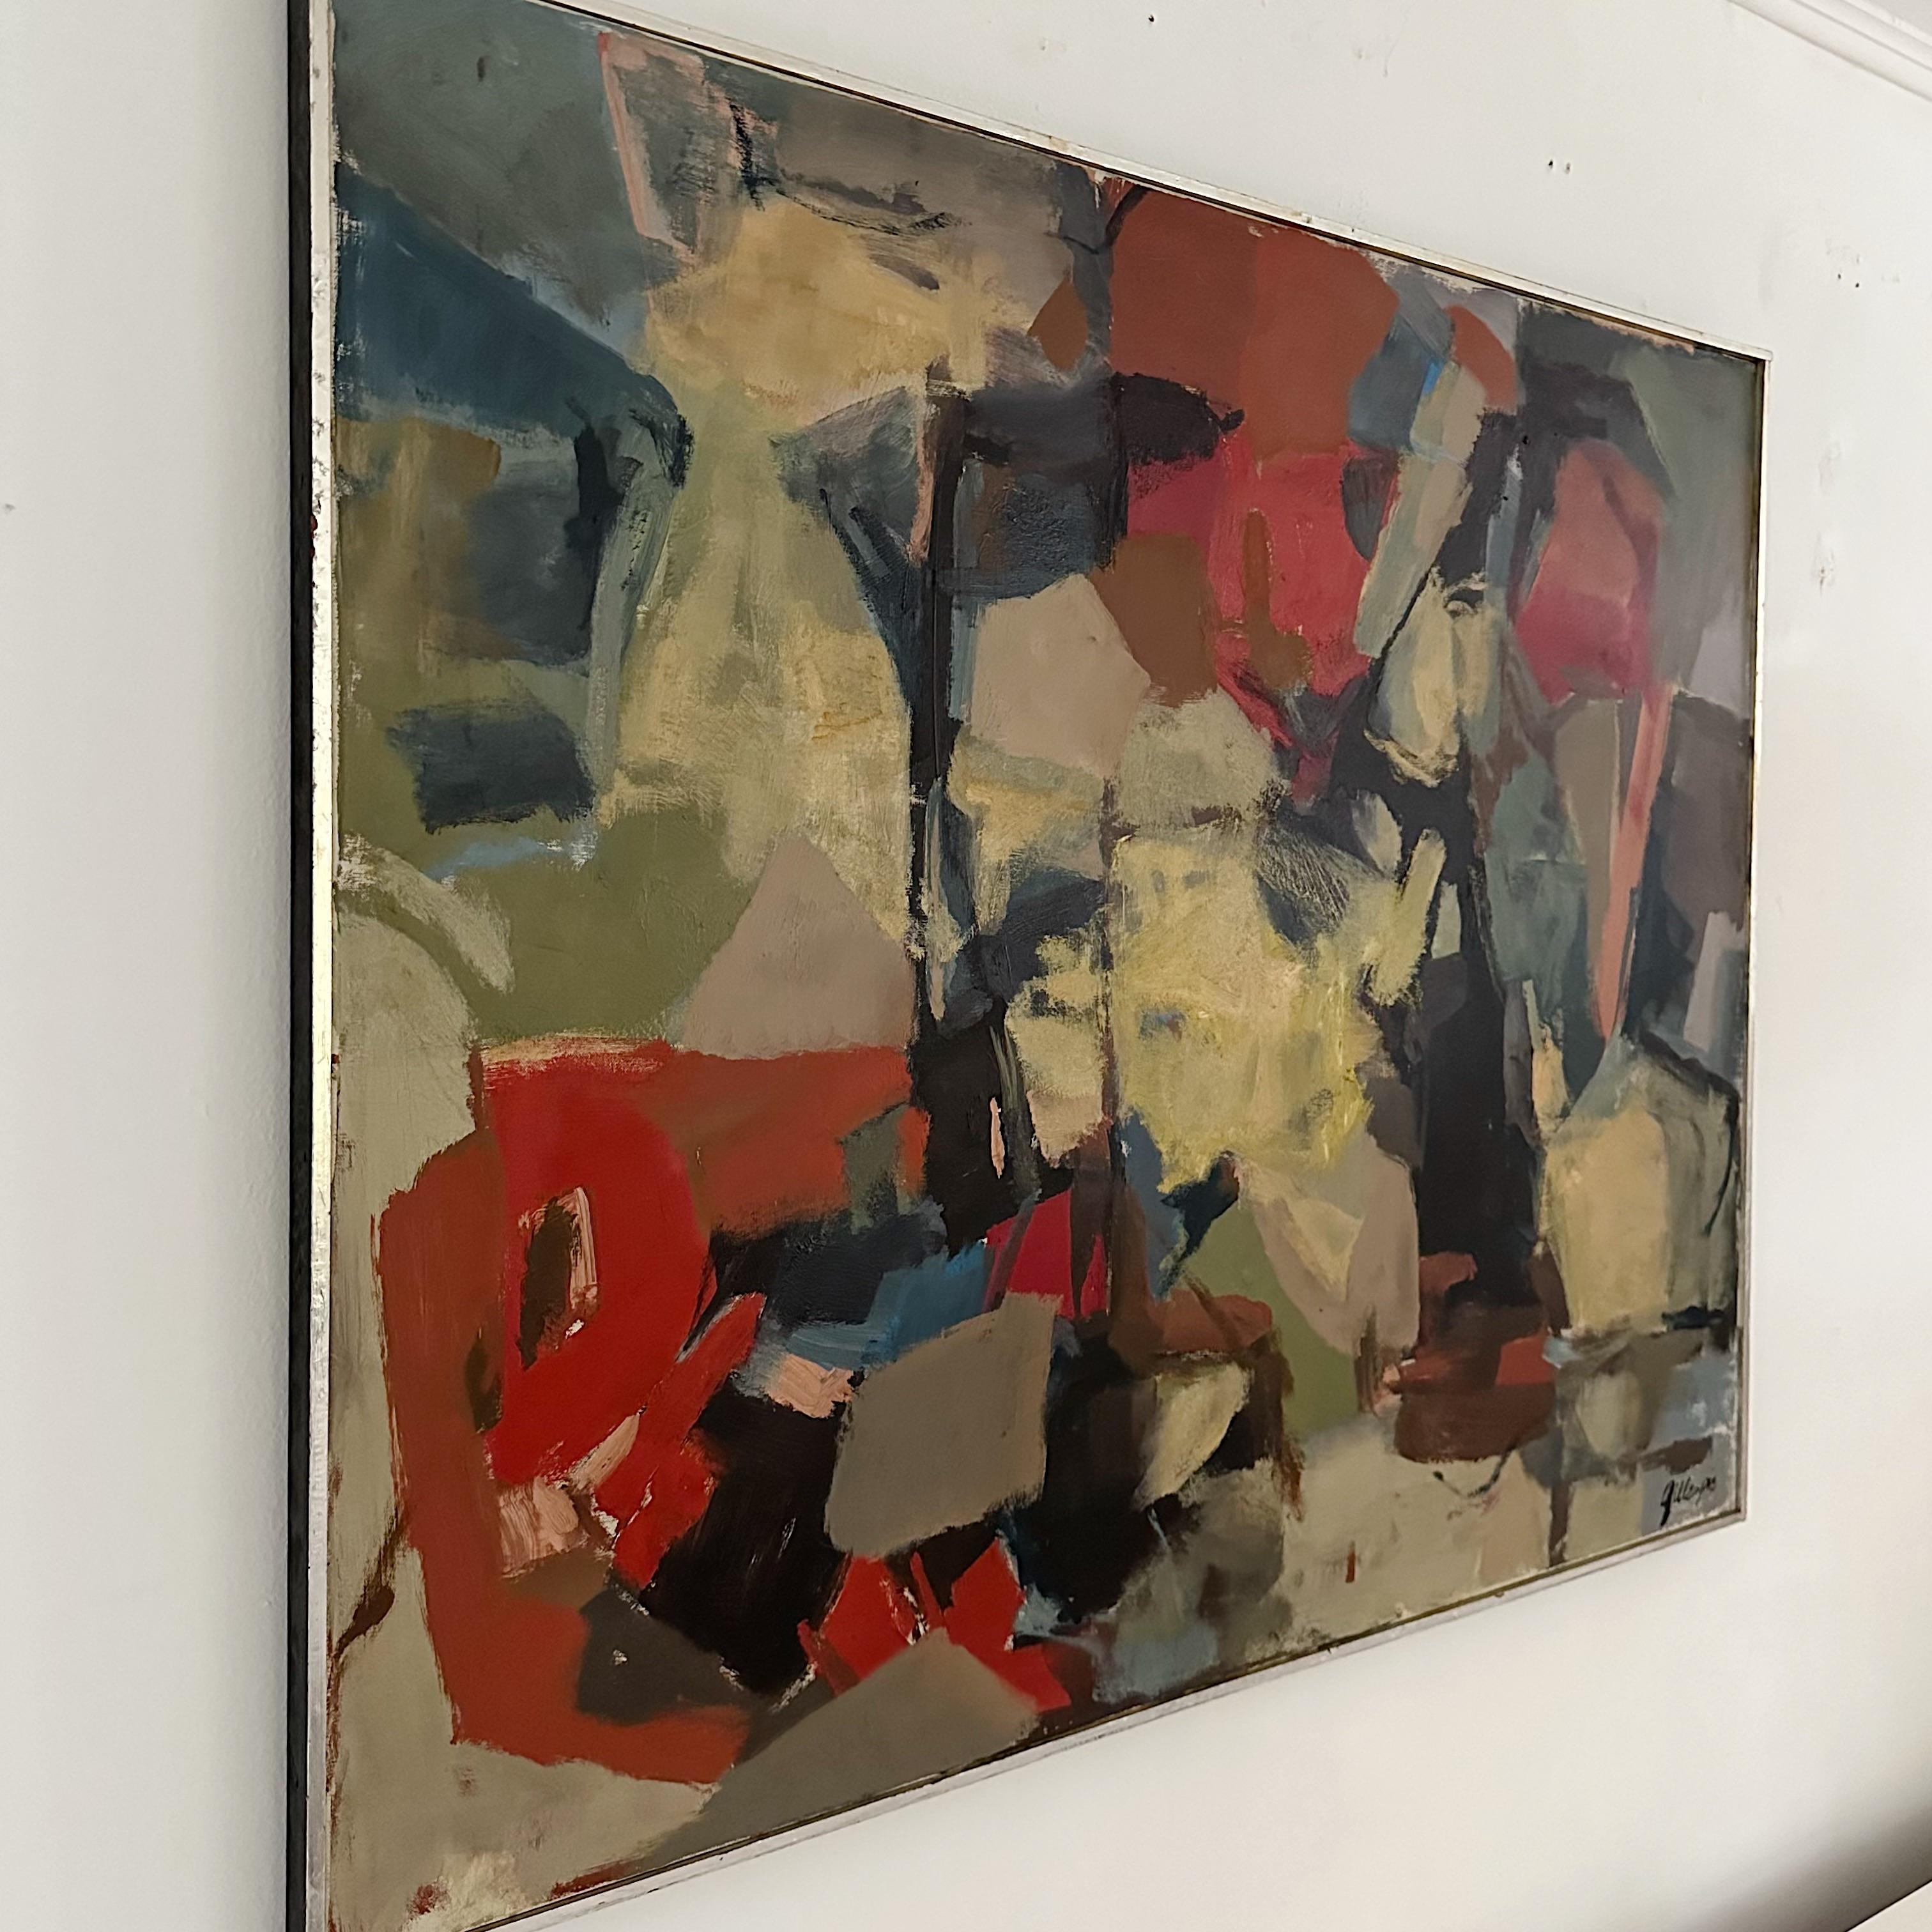 Vibrant and captivating abstract oil on canvas artwork by Dorothy Gillespie, an esteemed American painter and sculptor. Created in 1961, this colorful piece is framed in a silver leaf frame, adding a touch of elegance to its presentation. The